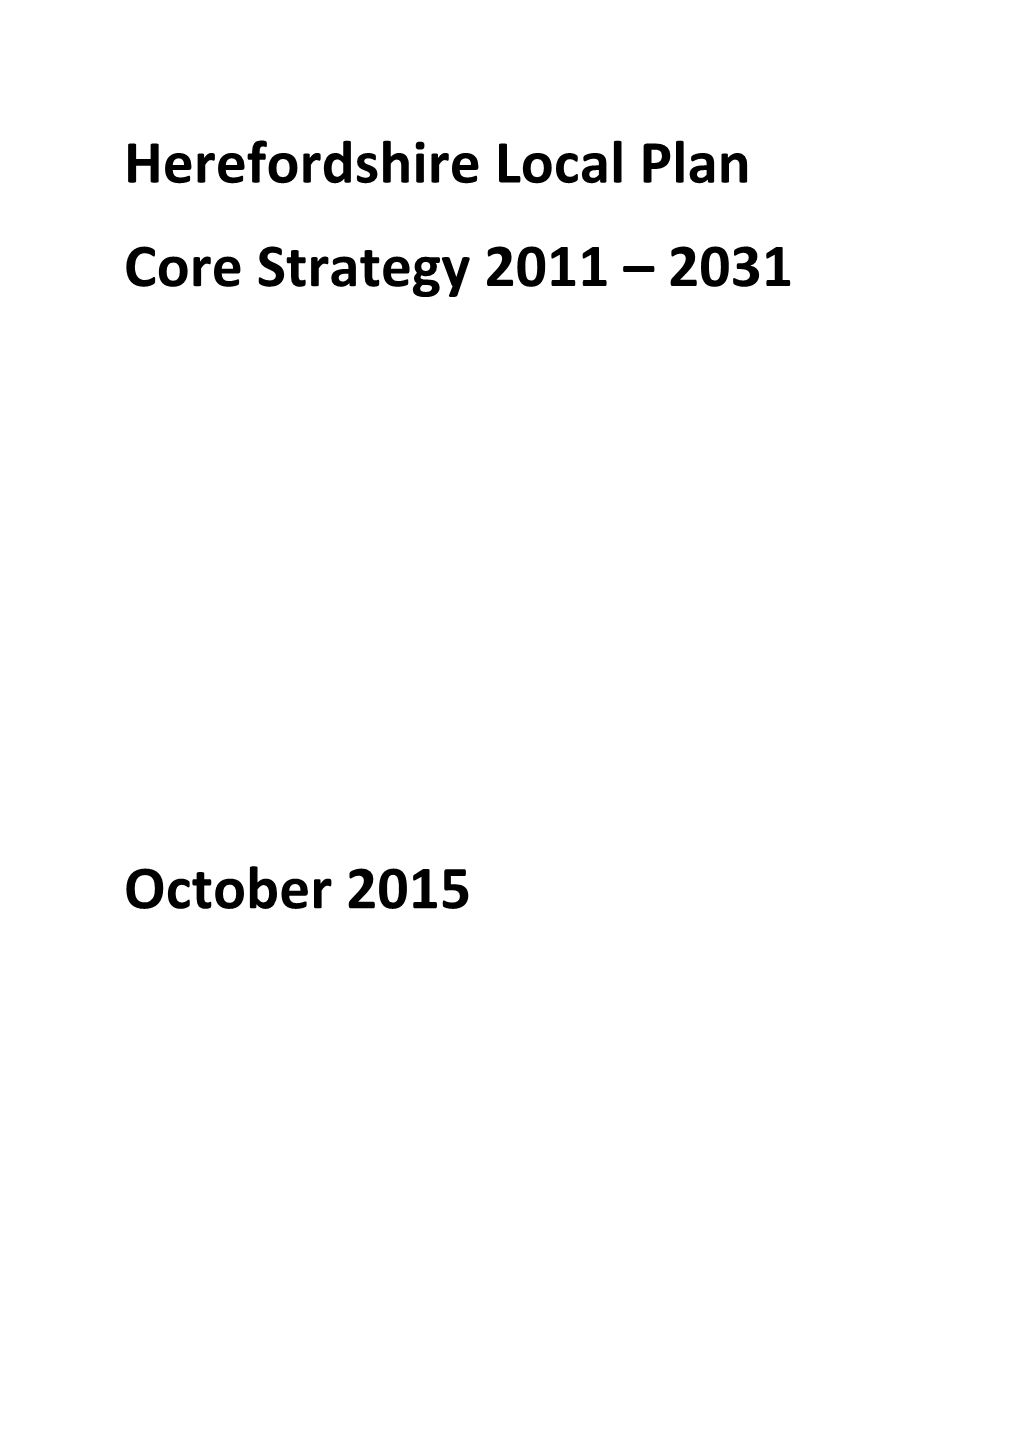 Herefordshire Local Plan Core Strategy 2011 – 2031